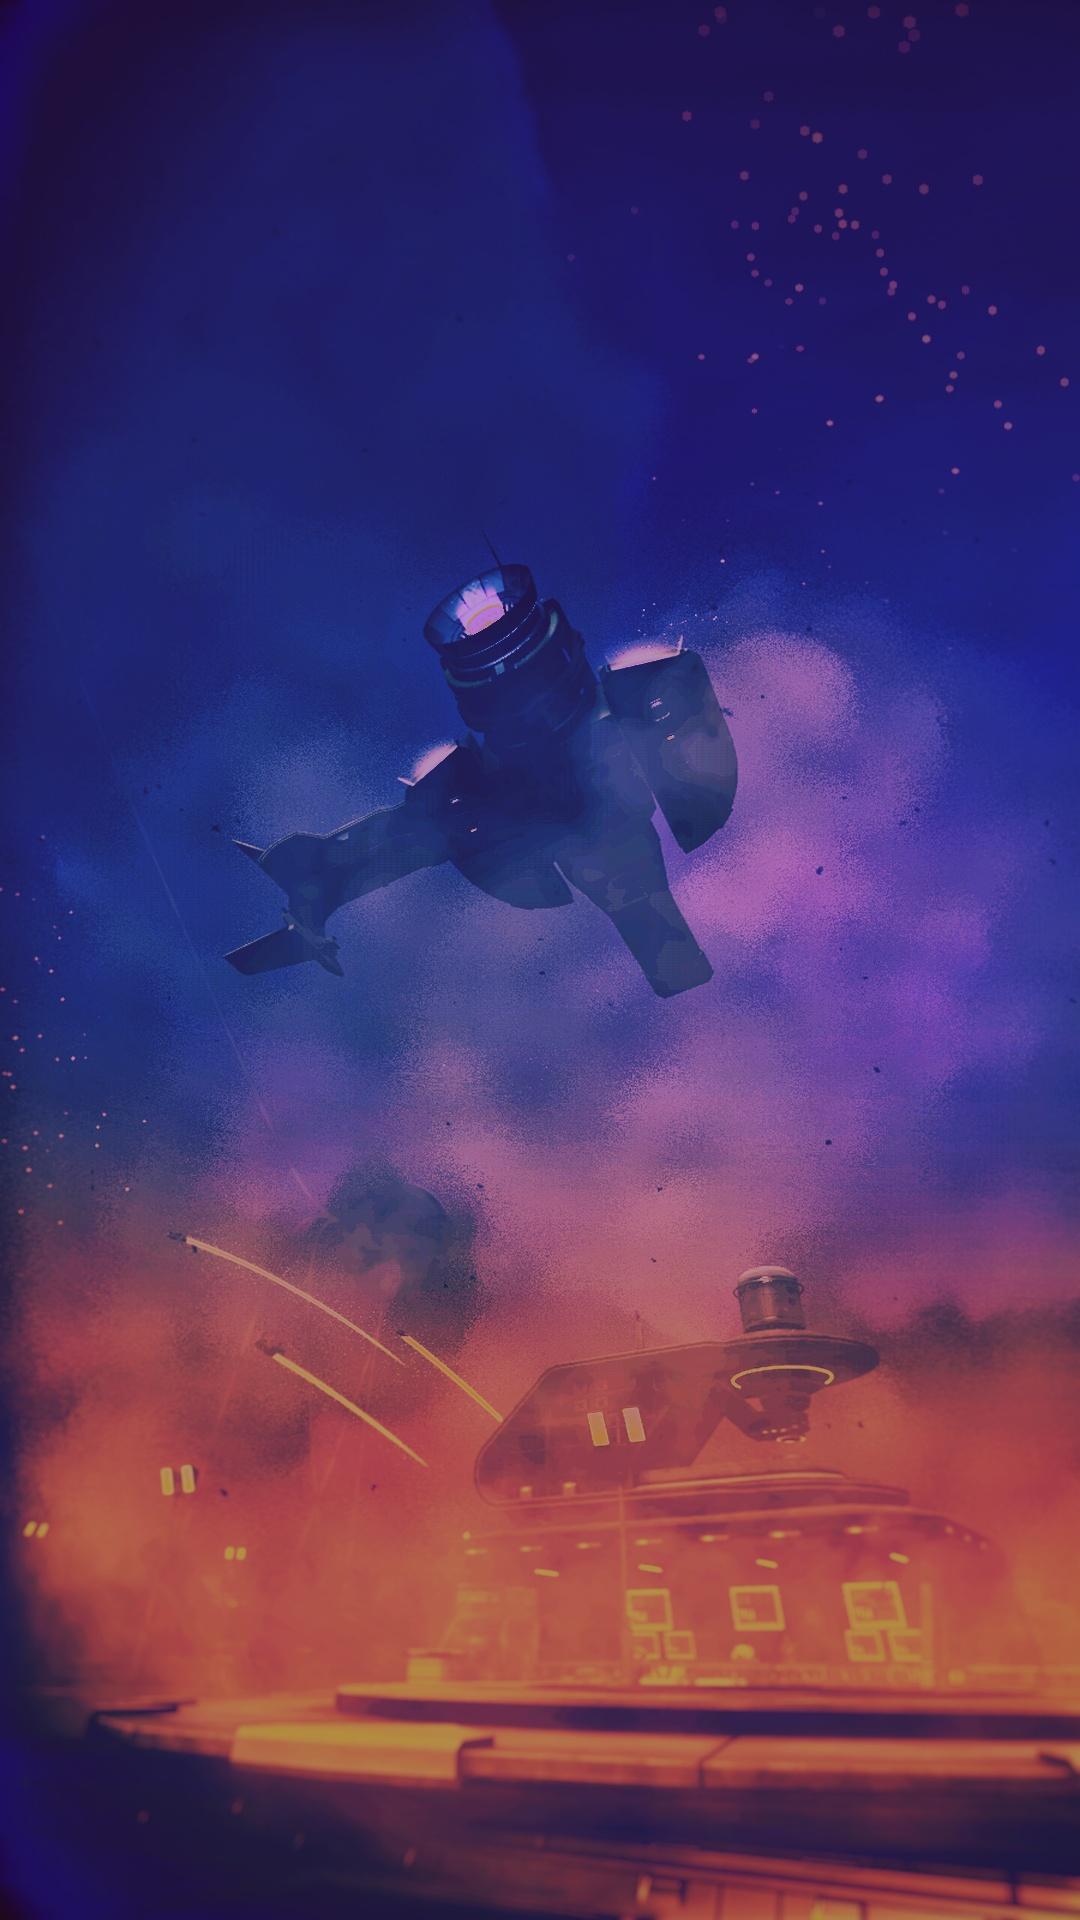 A Blade Runner Vibes phone wallpaper. Hope you like it